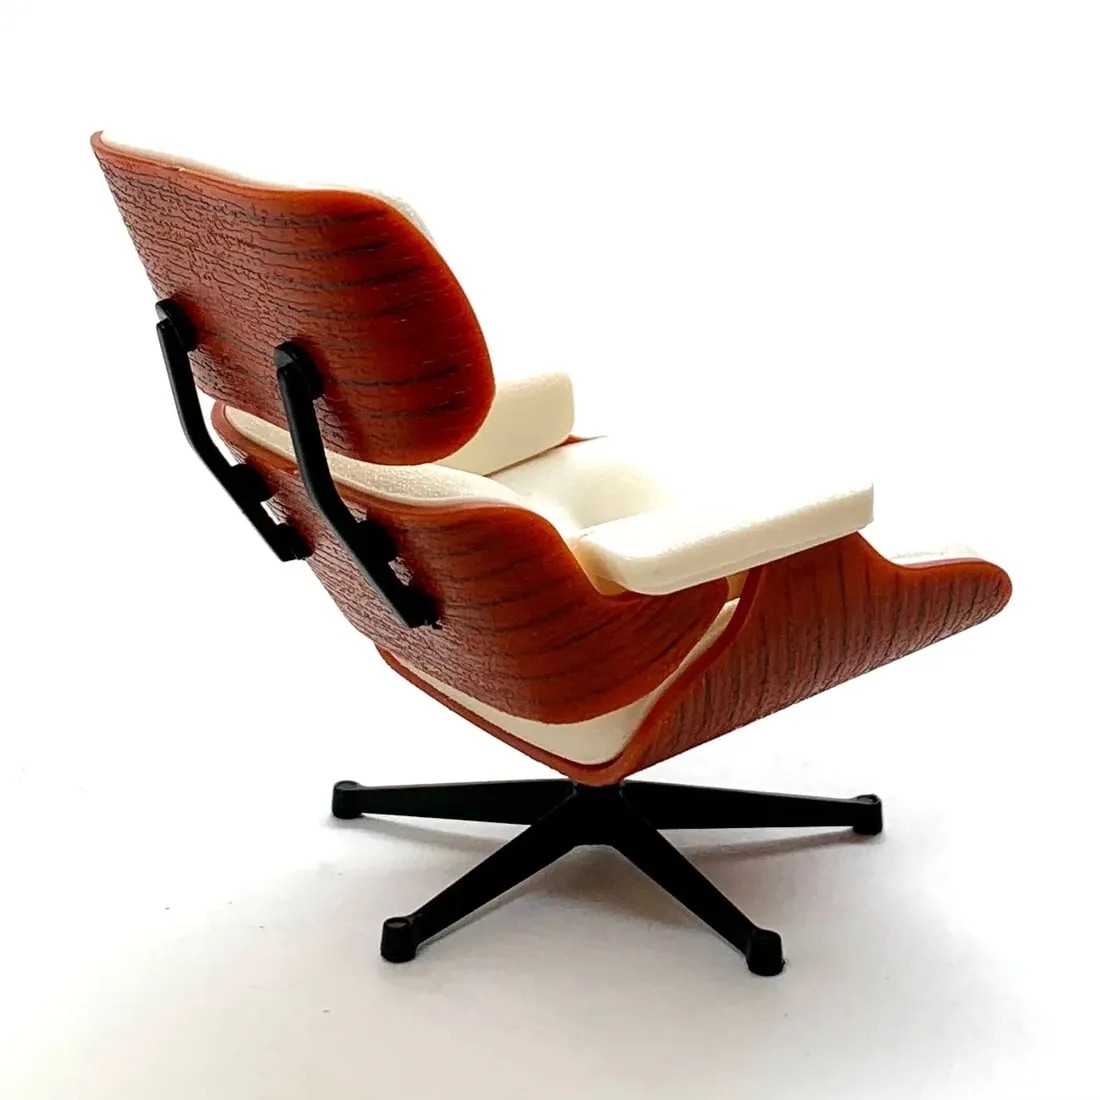 Eames White Lounge Chair Desk Display - Image 3 of 4